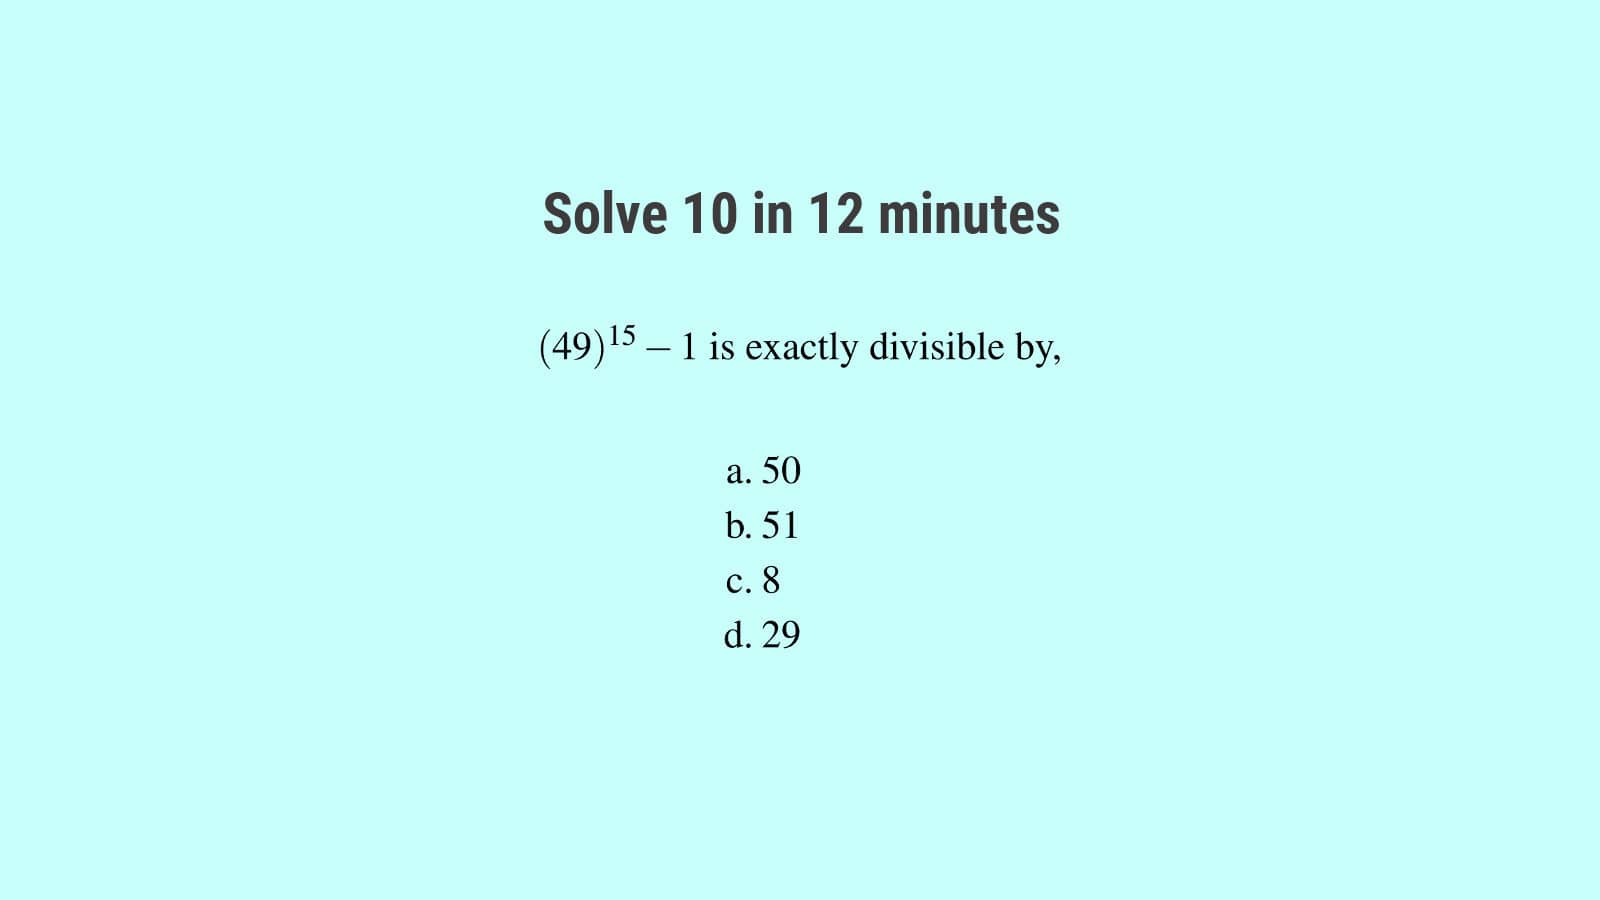 Solve 10 SSC CGL Number System Questions Set 55